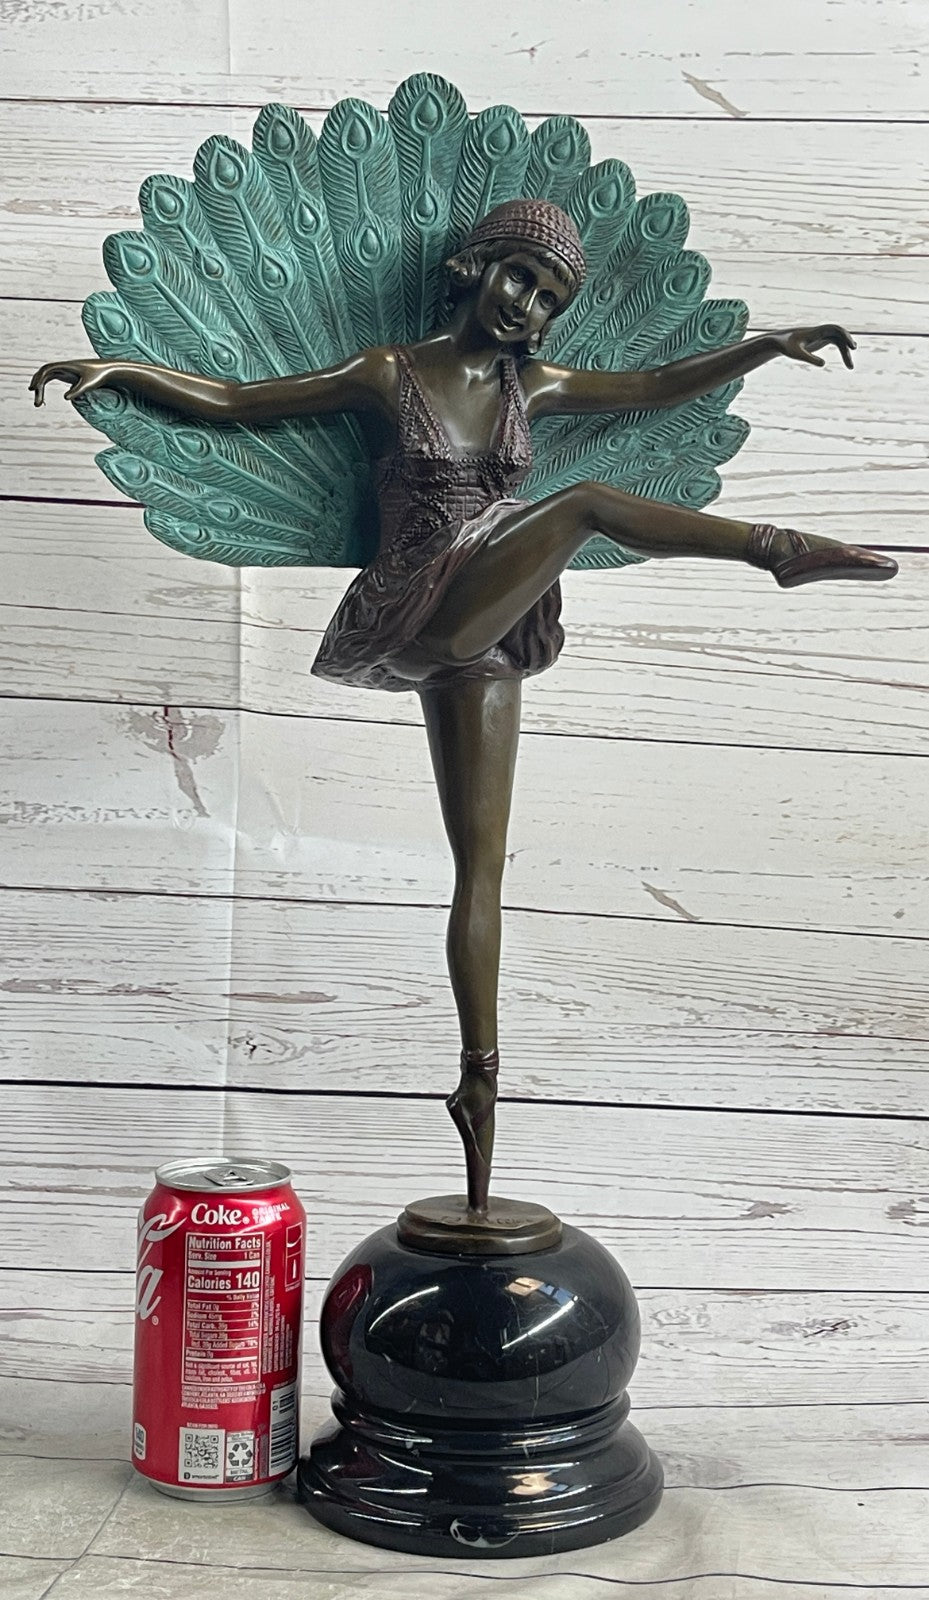 NEW ART Deco Bronze Marble Nude Belle and Peacock Sculpture Marble Base Figurine